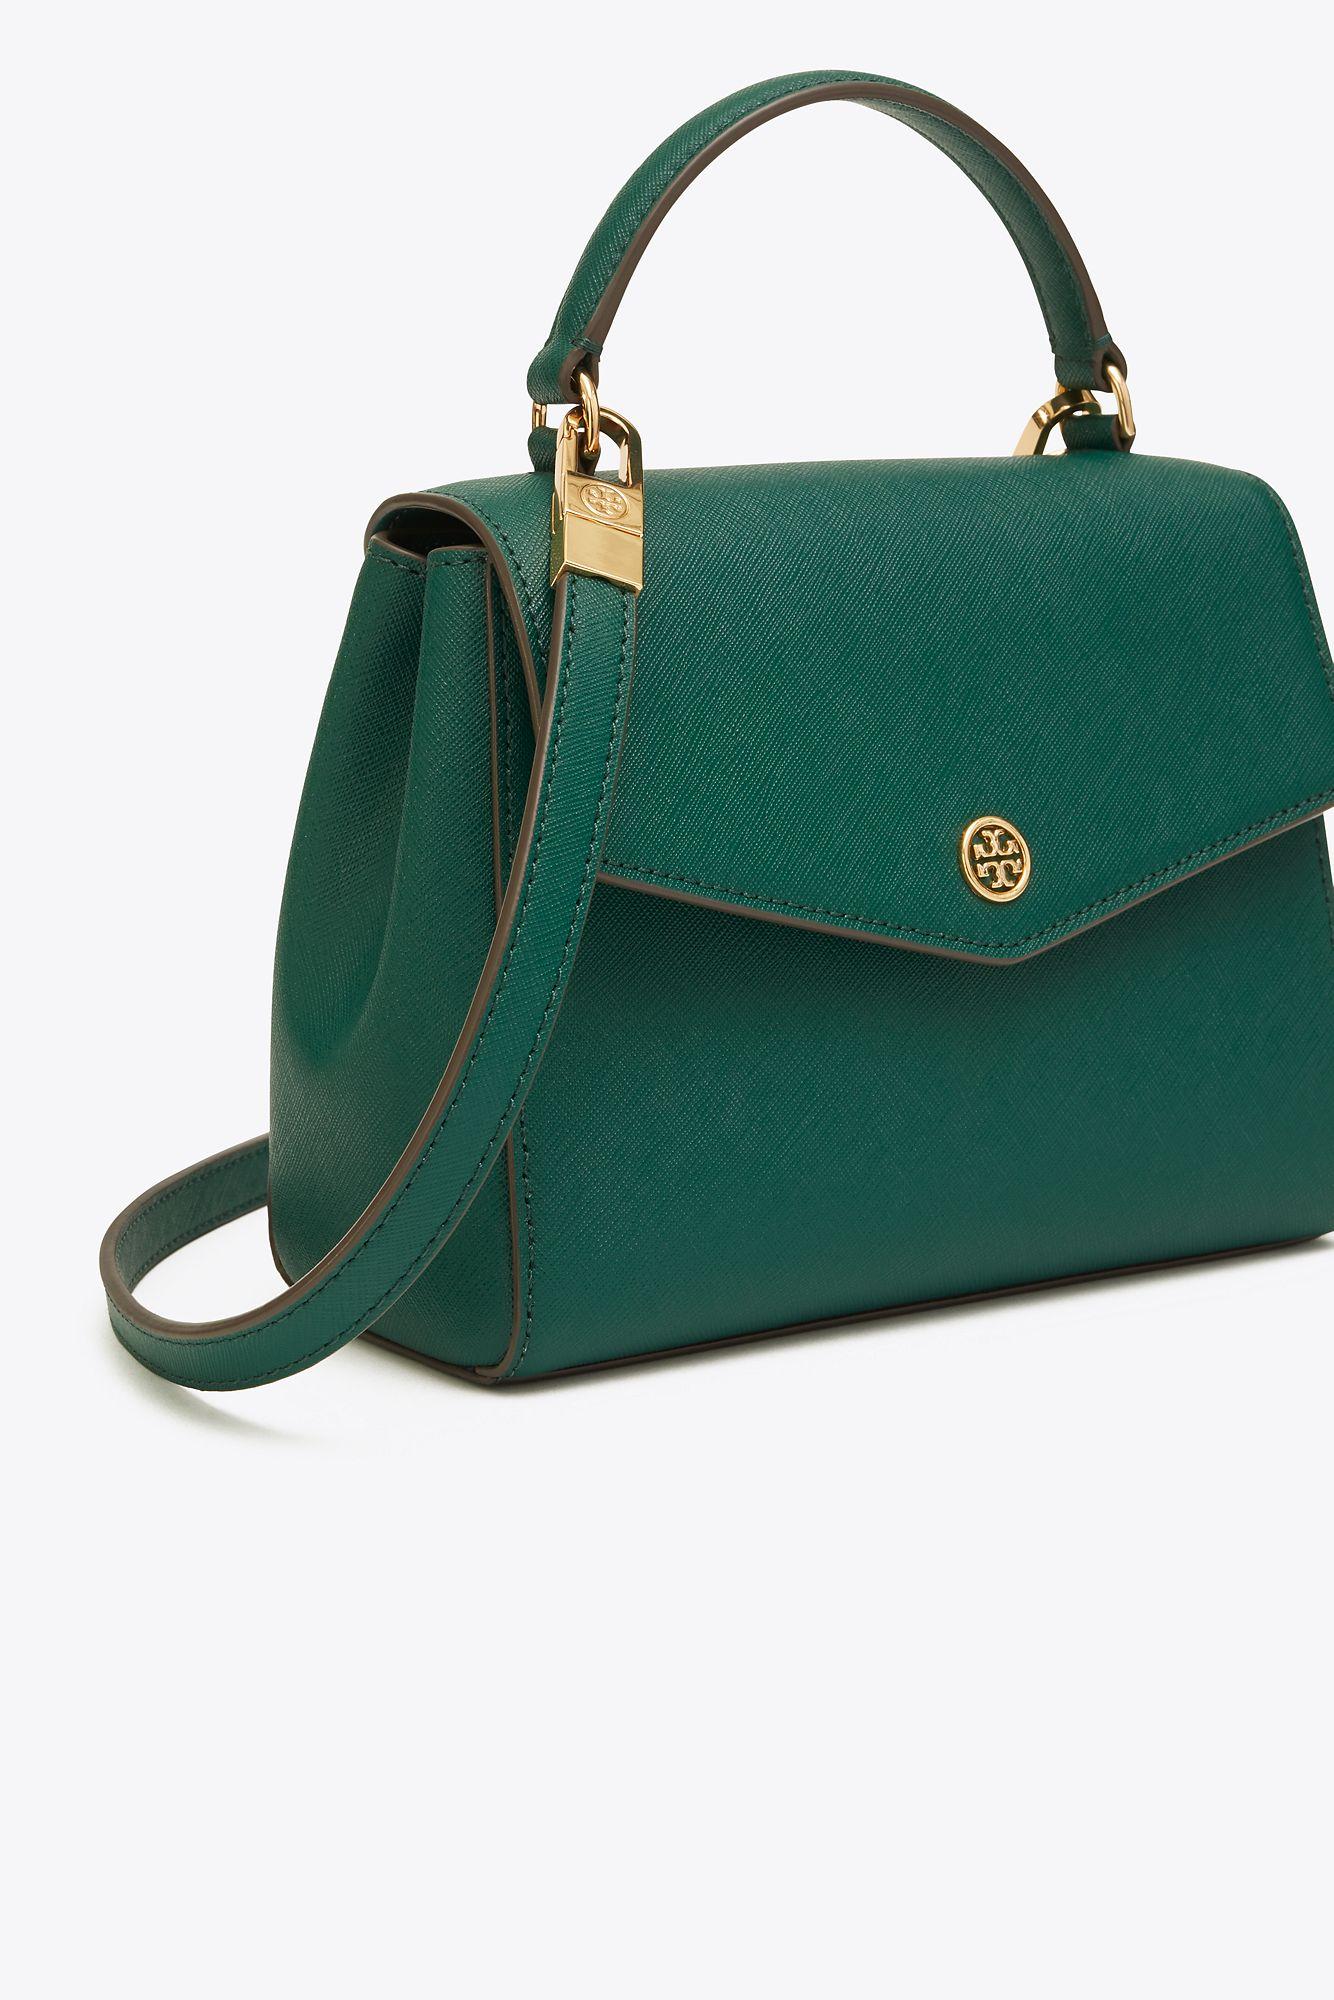 Tory Burch Robinson Small Top-handle Satchel in Green | Lyst Canada